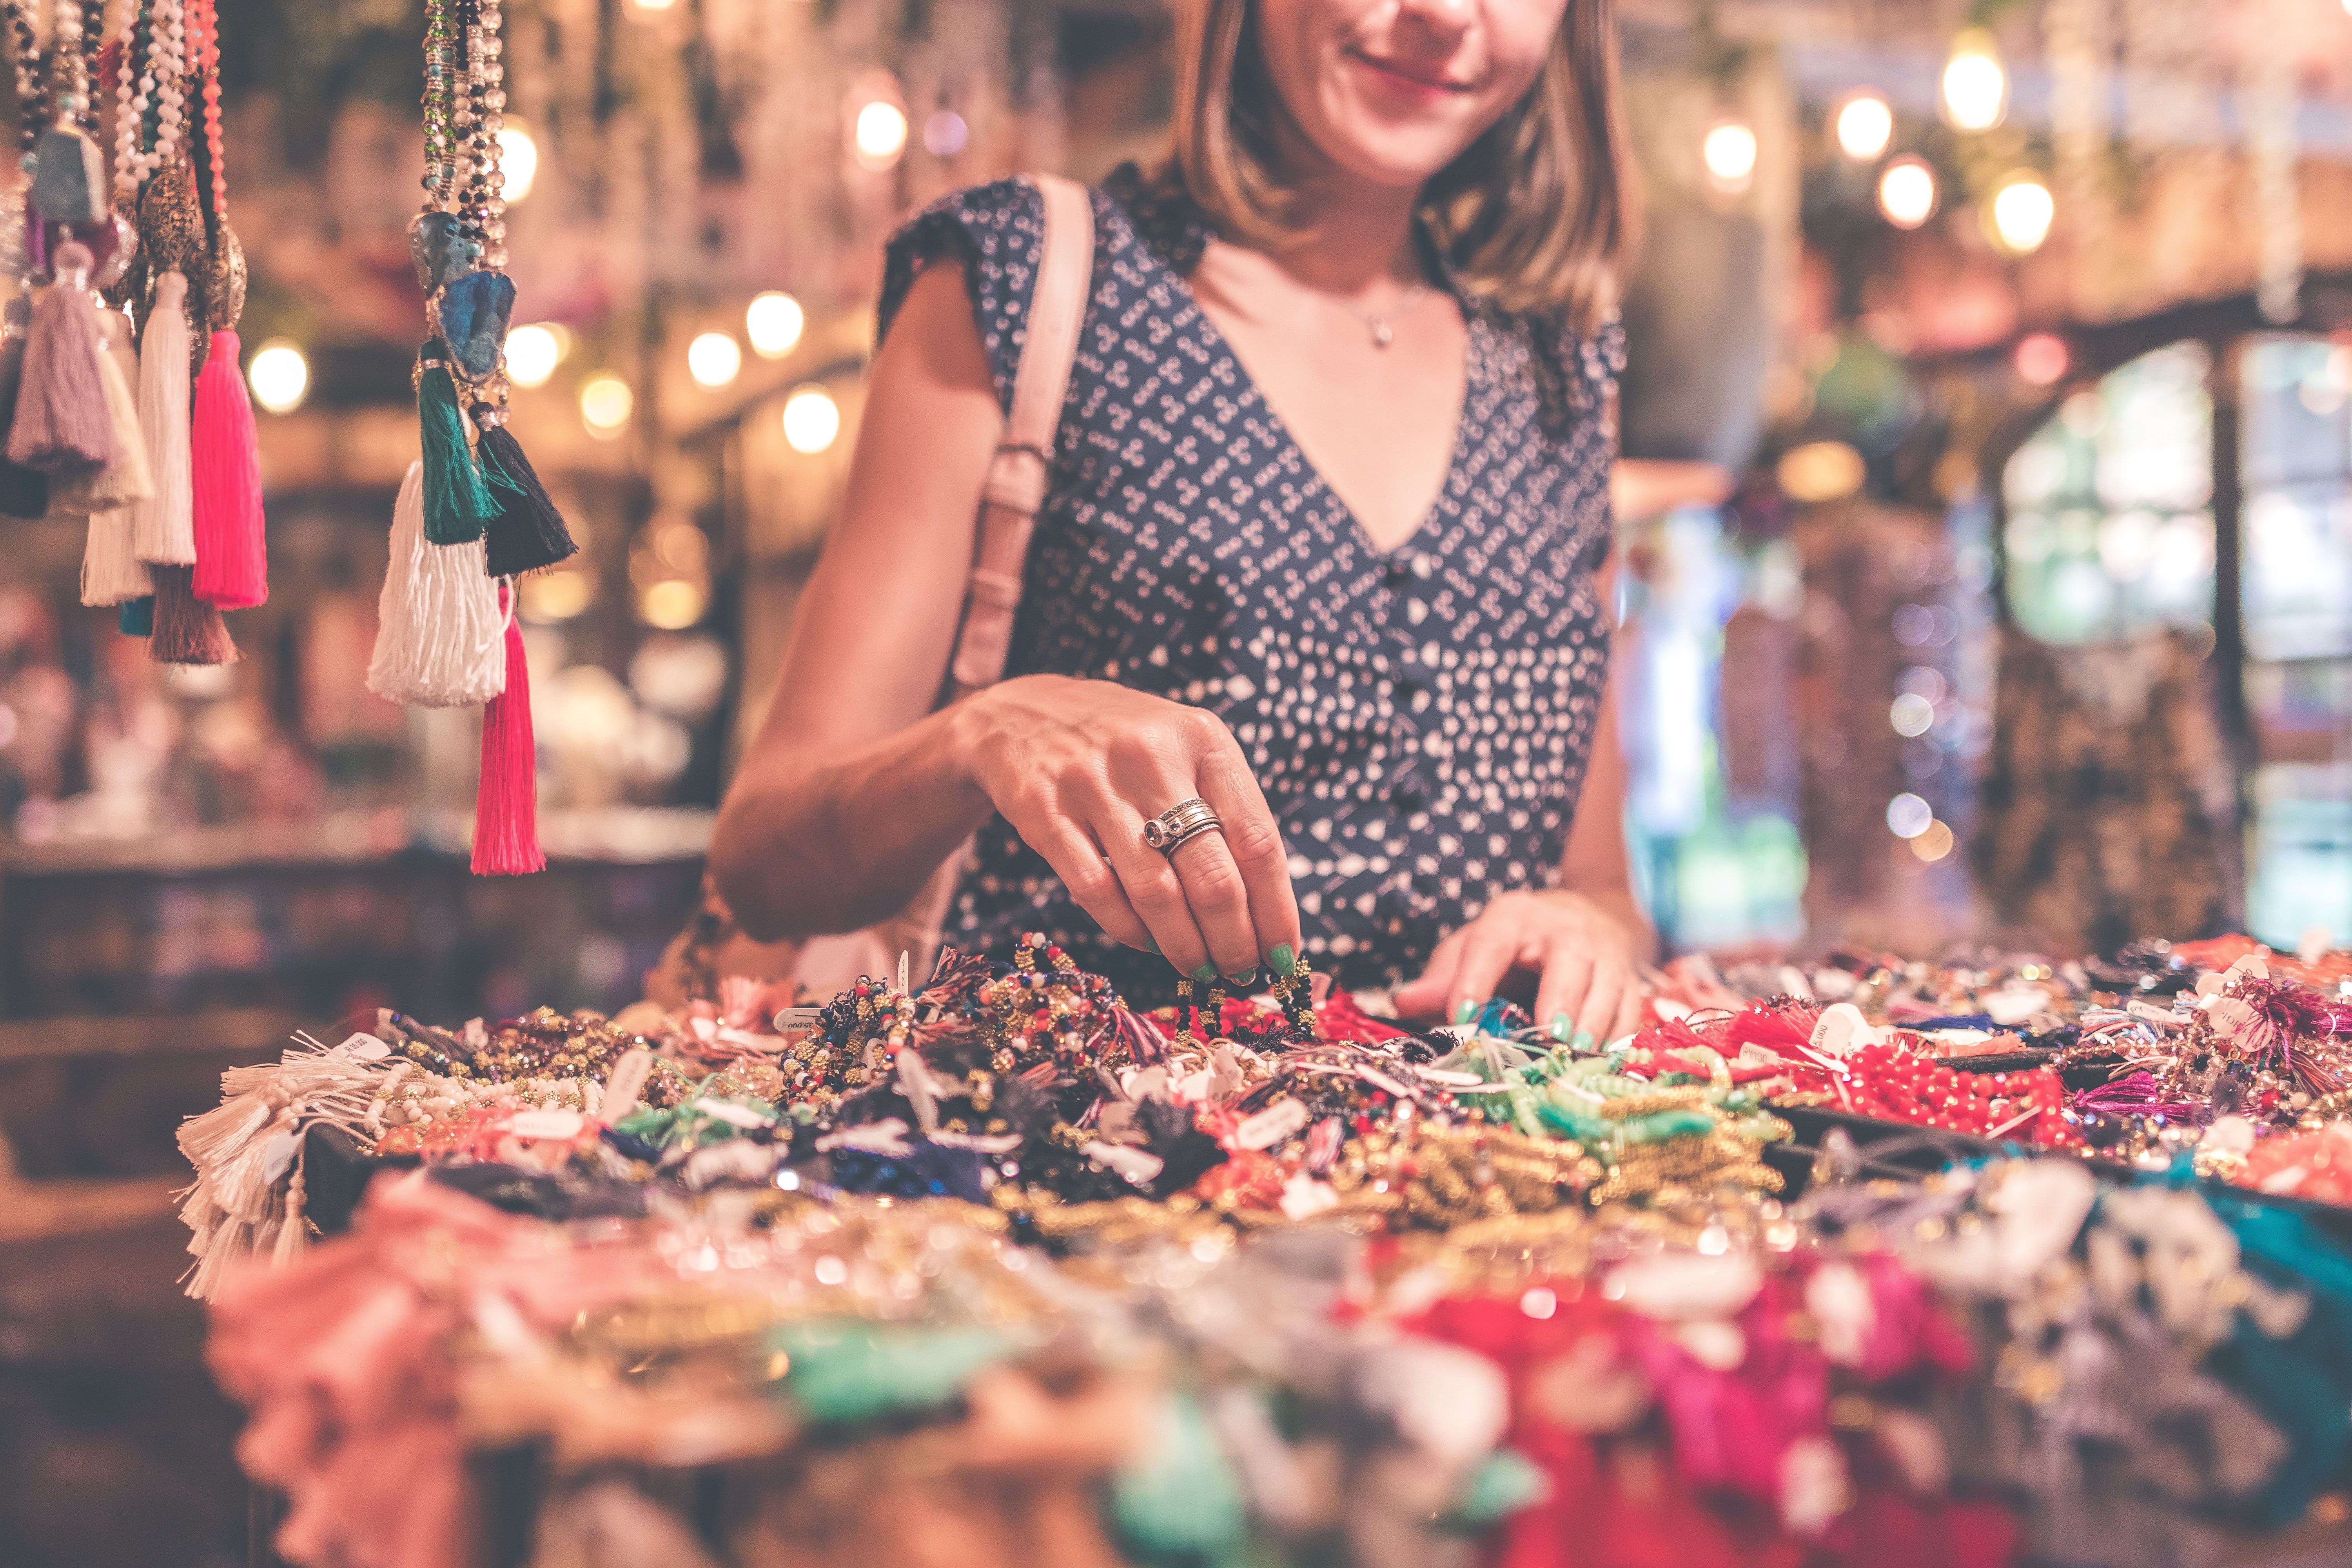 OP was just finishing up her shift at the jewelry section when she ran into a senior coworker | Photo: Pexels